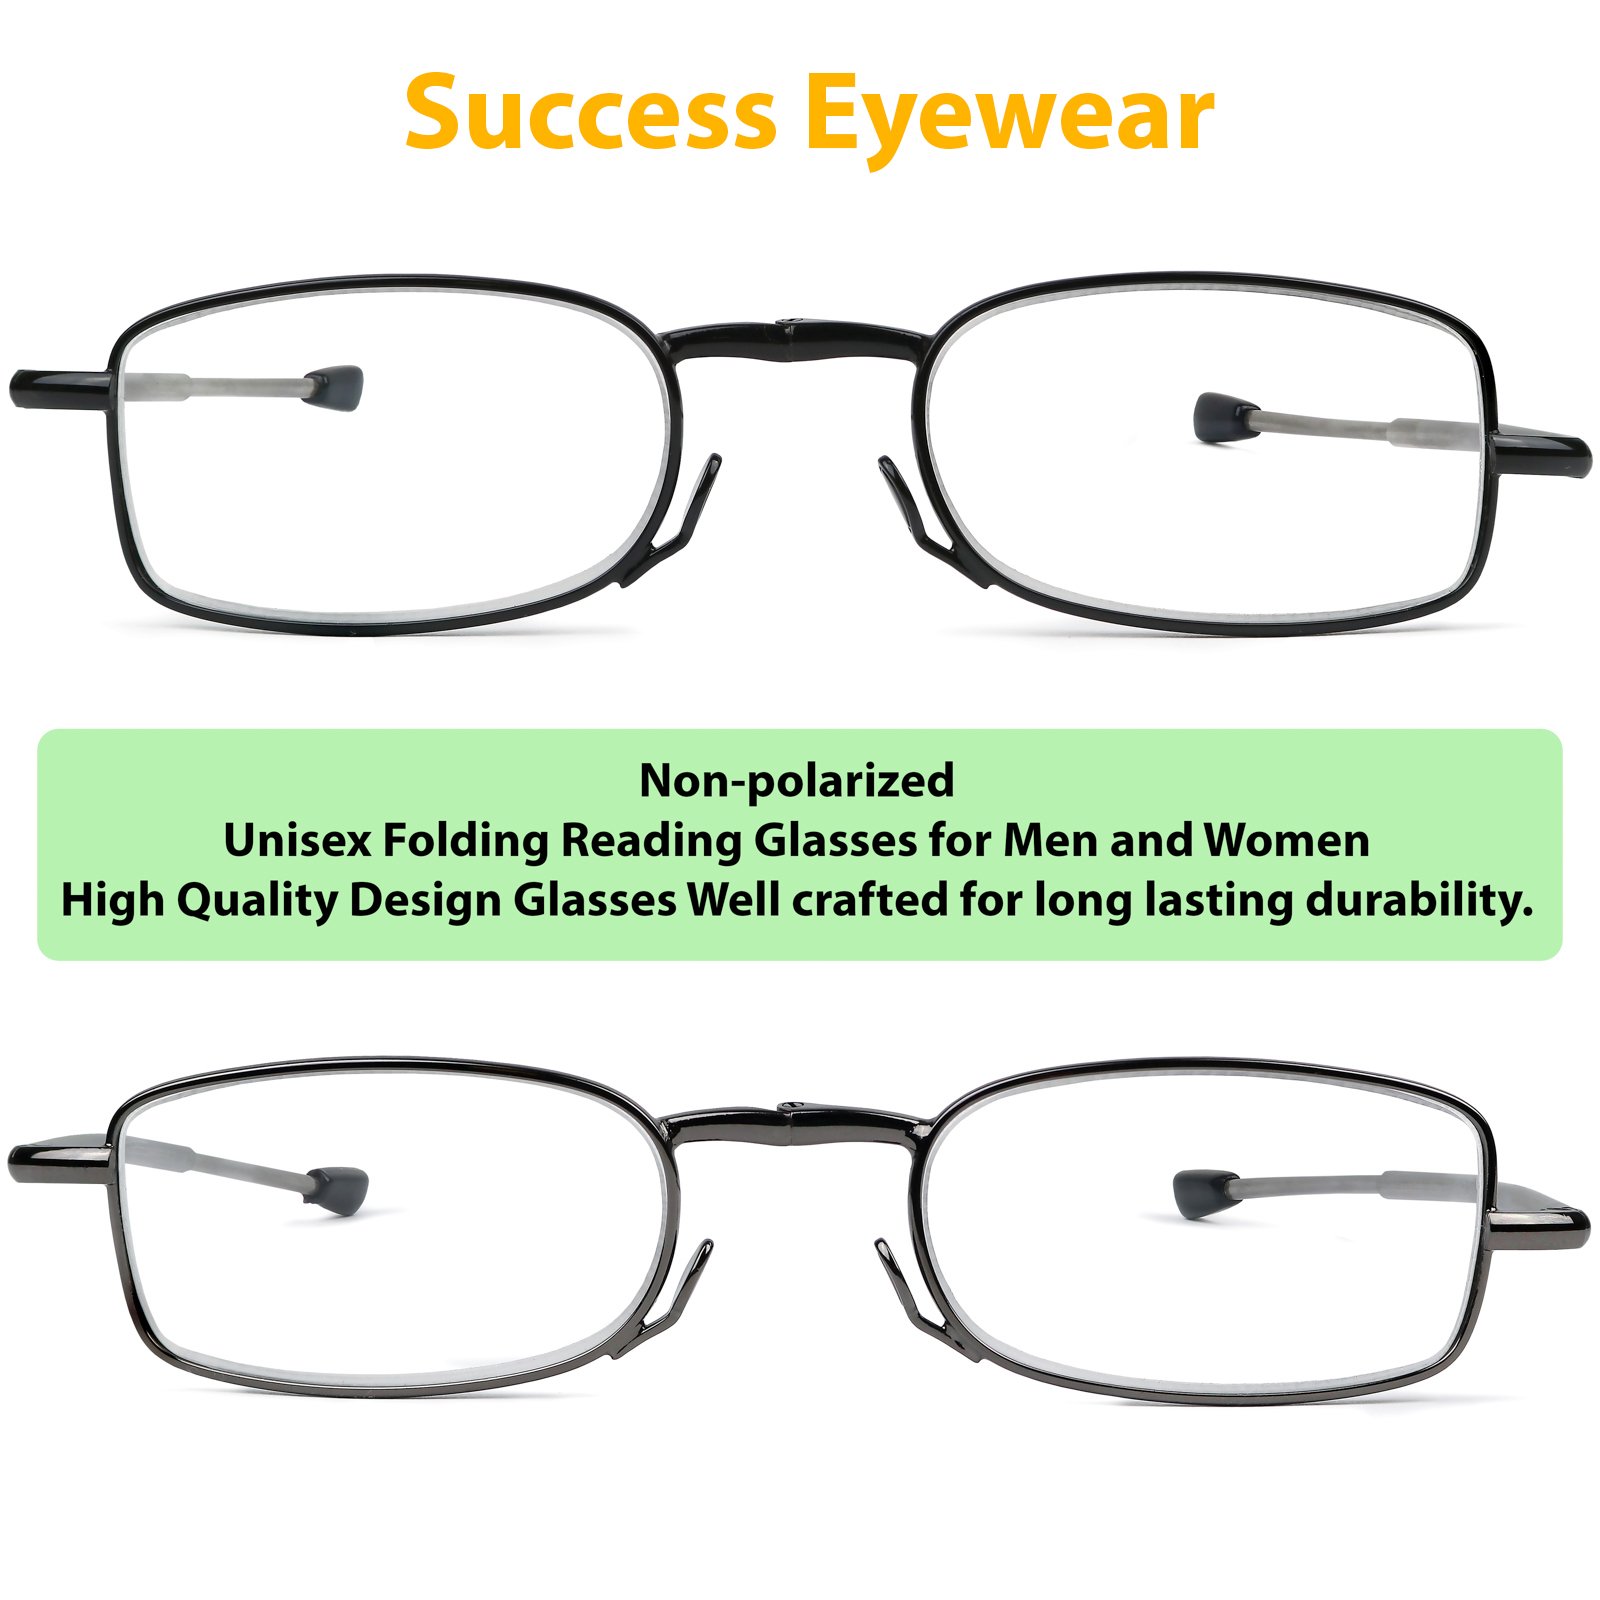 Success Eyewear Reading Glasses 2 Pair Black and Gunmetal Readers Compact Folding Unisex Glasses for Reading Case Included